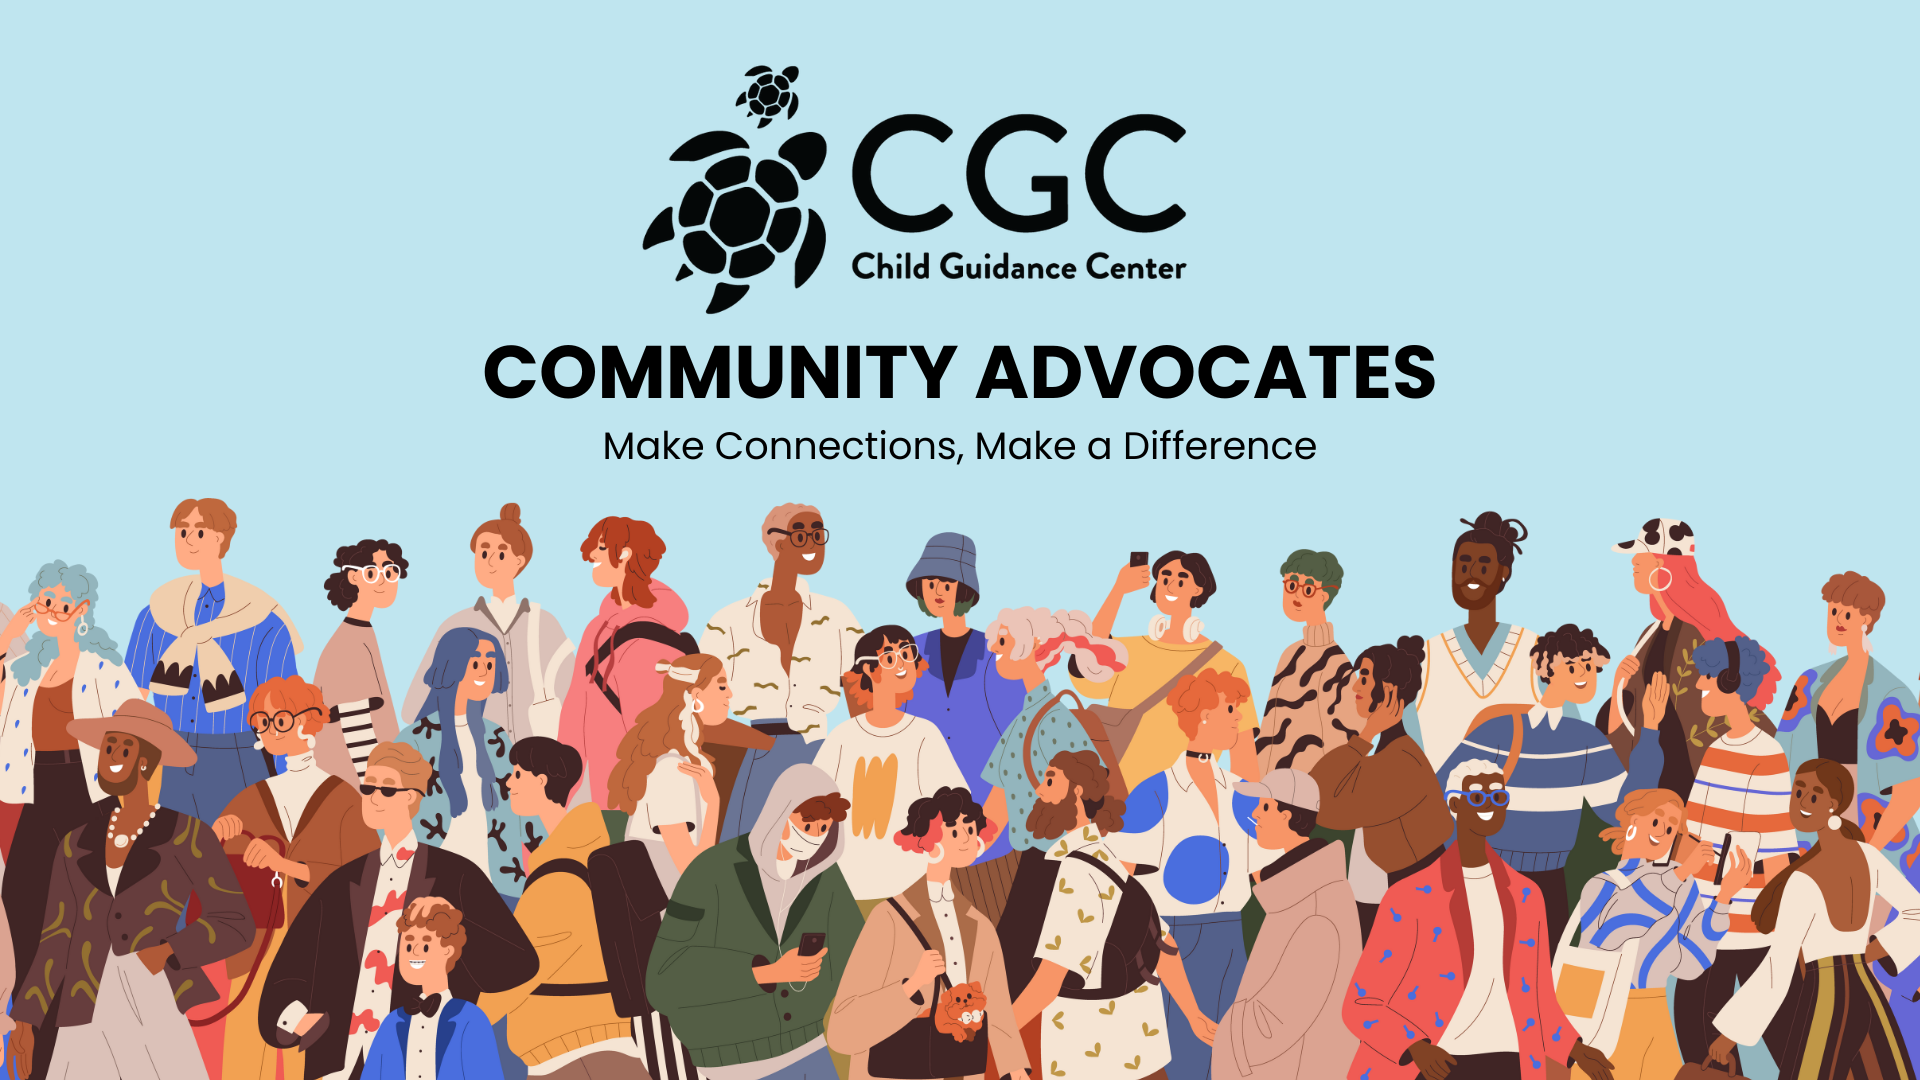 [CGC logo] Community Advocates: Make Connections, Make a Difference